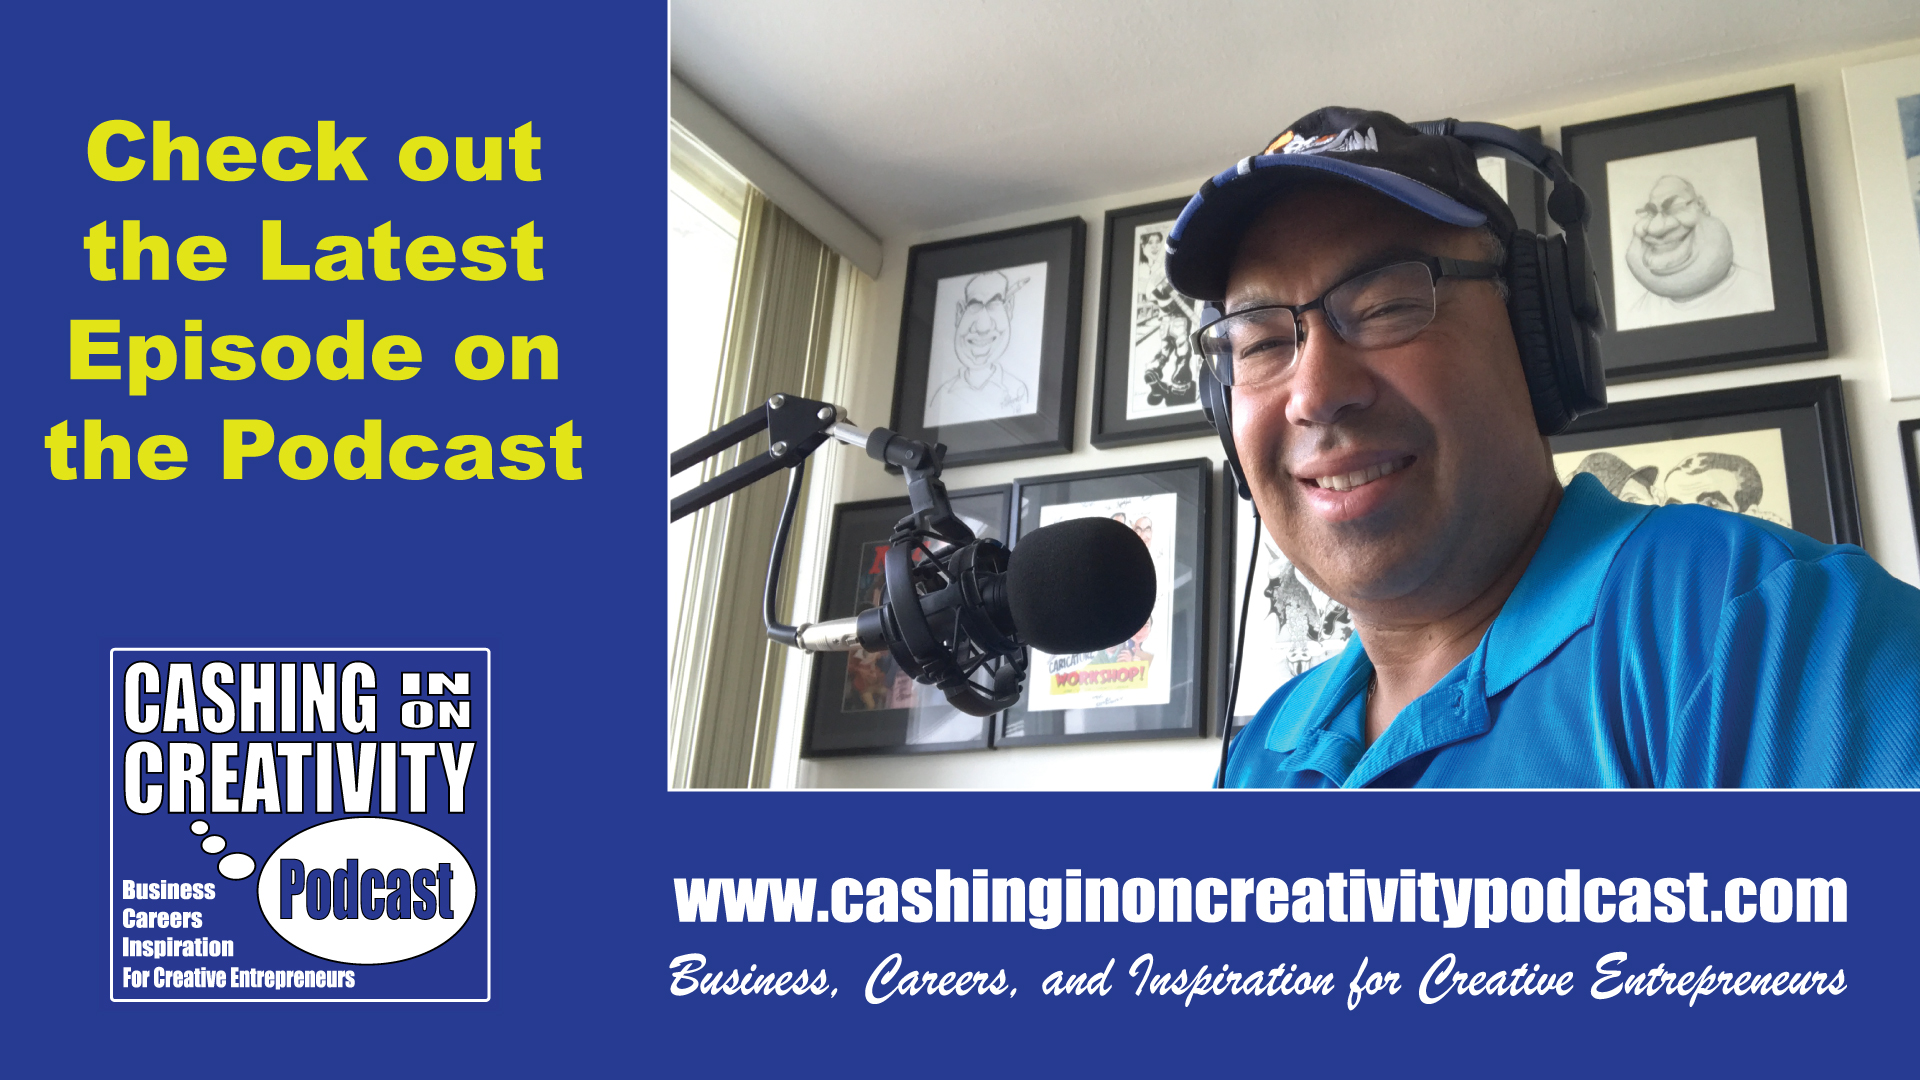 Cashing in on Creativity Podcast